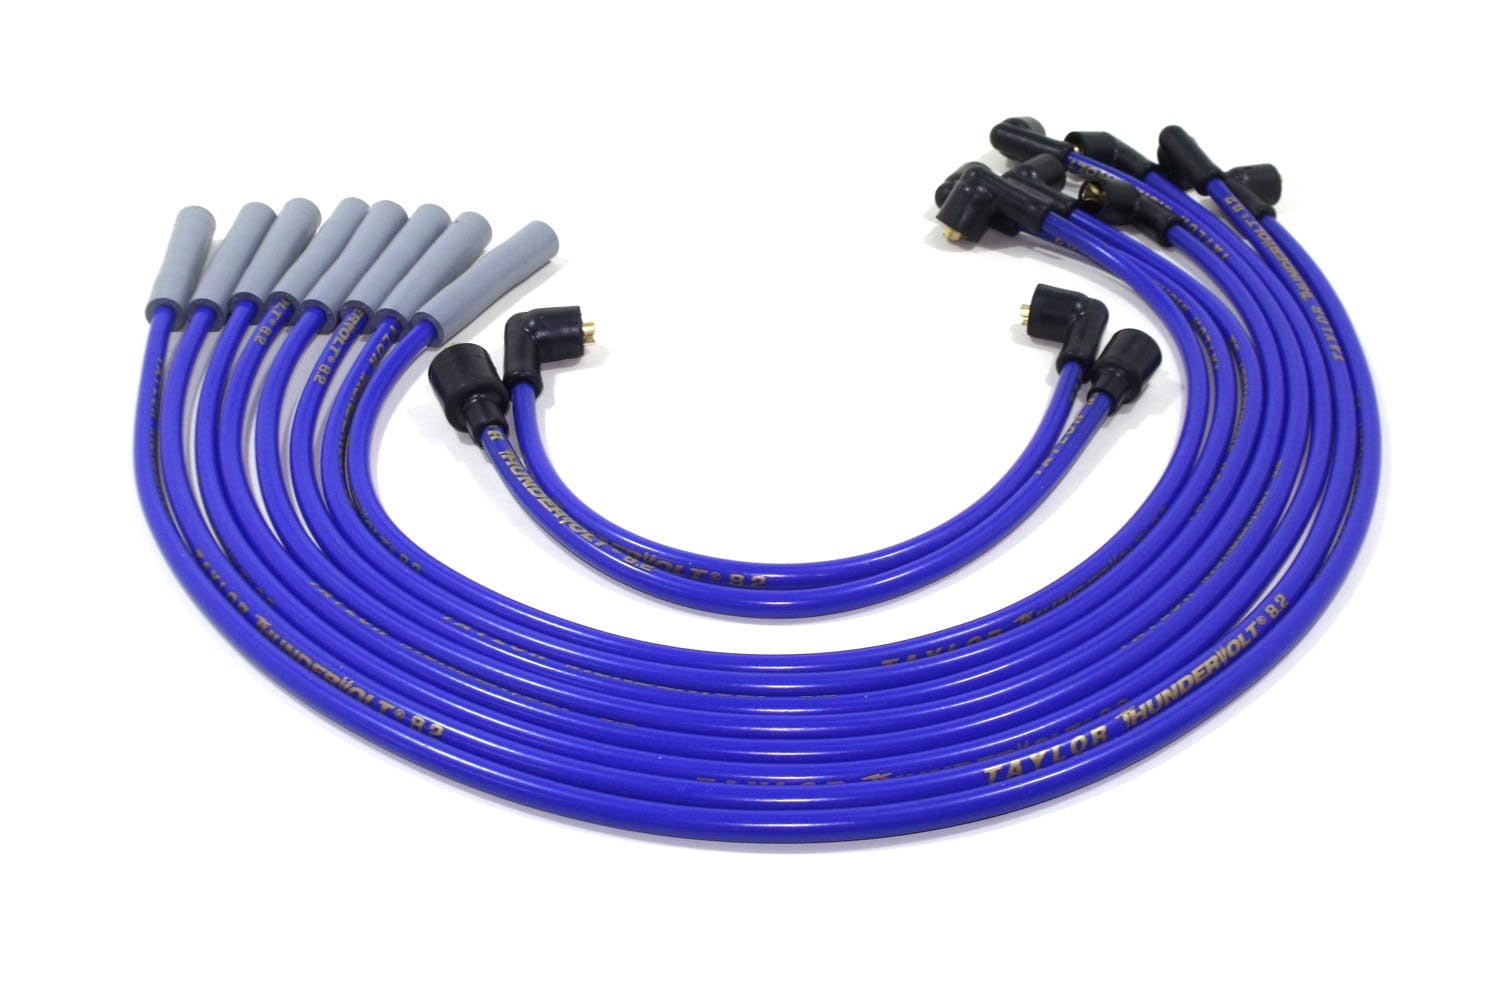 Taylor Cable Products 84651 Thundervolt 8.2 custom 8 cyl blue